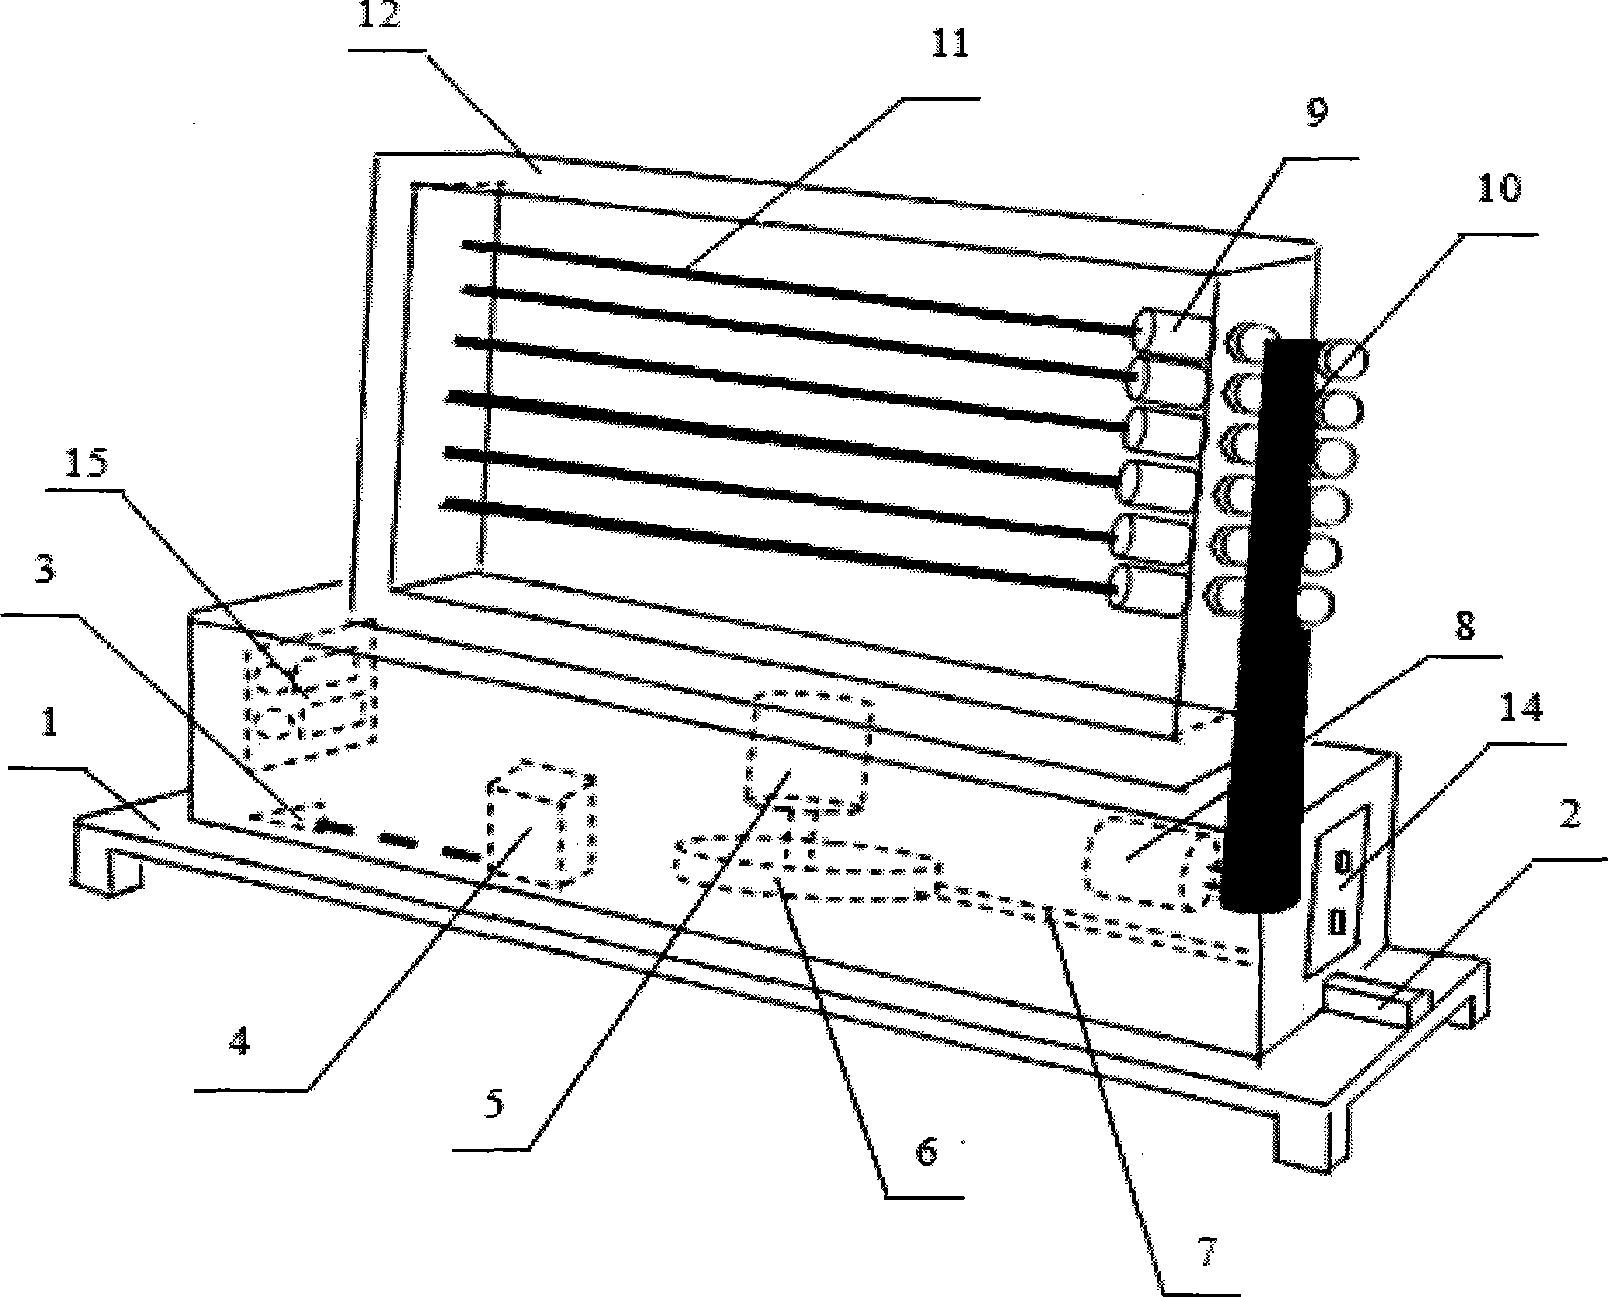 Receiving device for bilaterally collecting electric spinning polymer fiber tubes